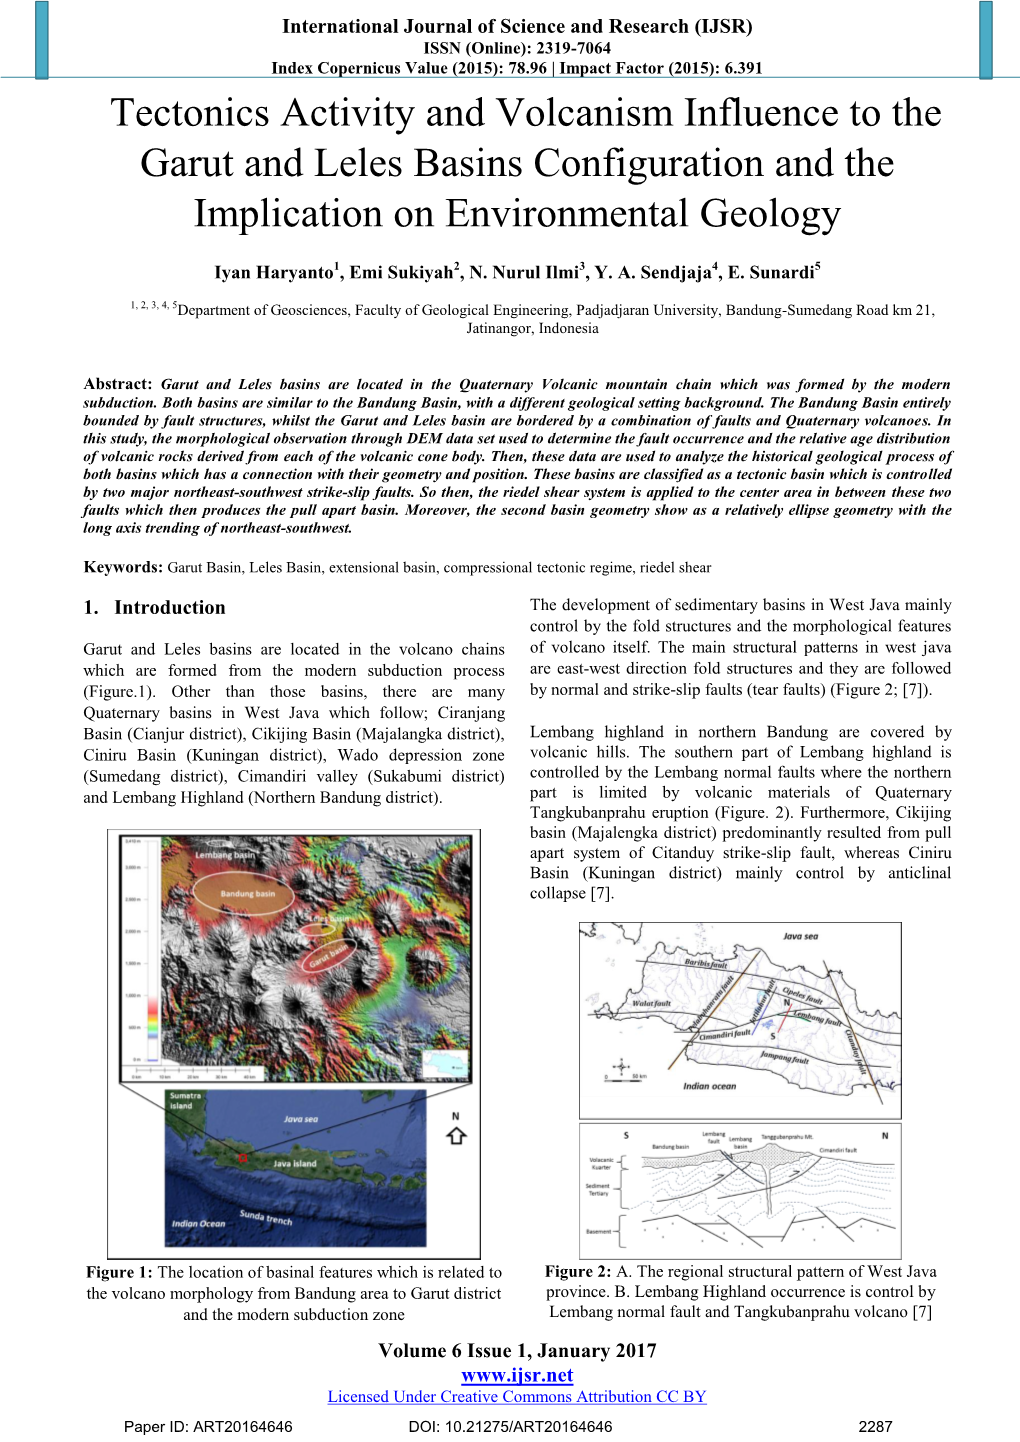 Tectonics Activity and Volcanism Influence to the Garut and Leles Basins Configuration and the Implication on Environmental Geology